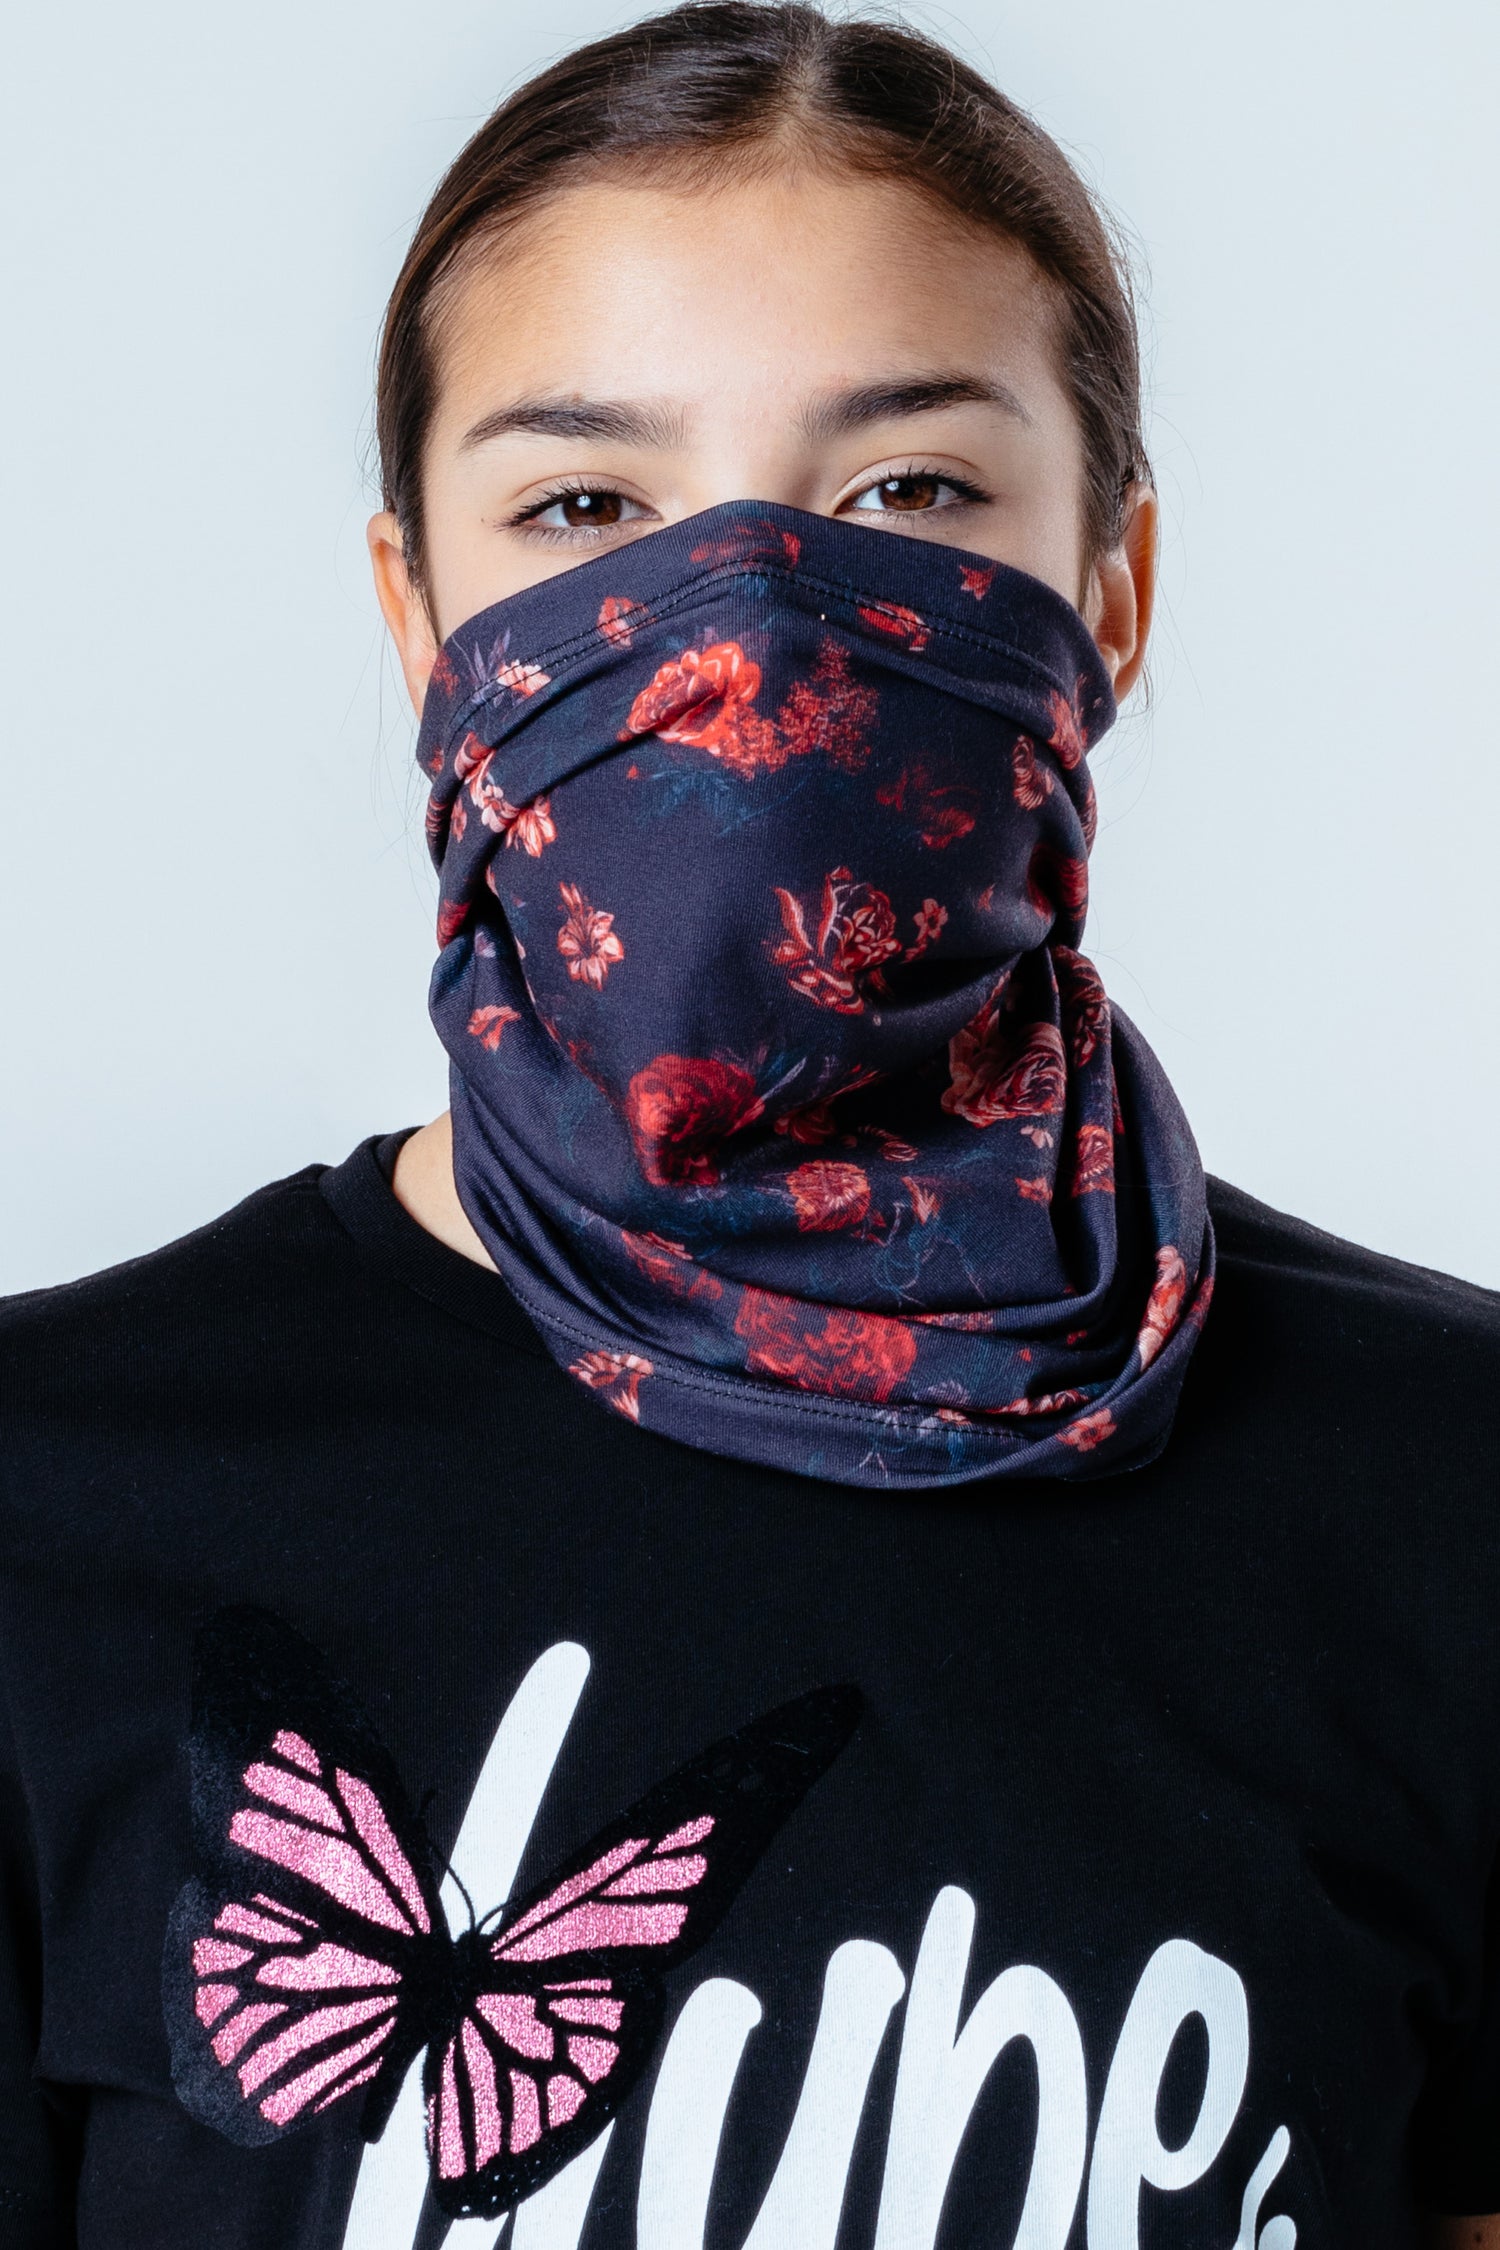 HYPE RED ROSES SNOOD HEADWEAR